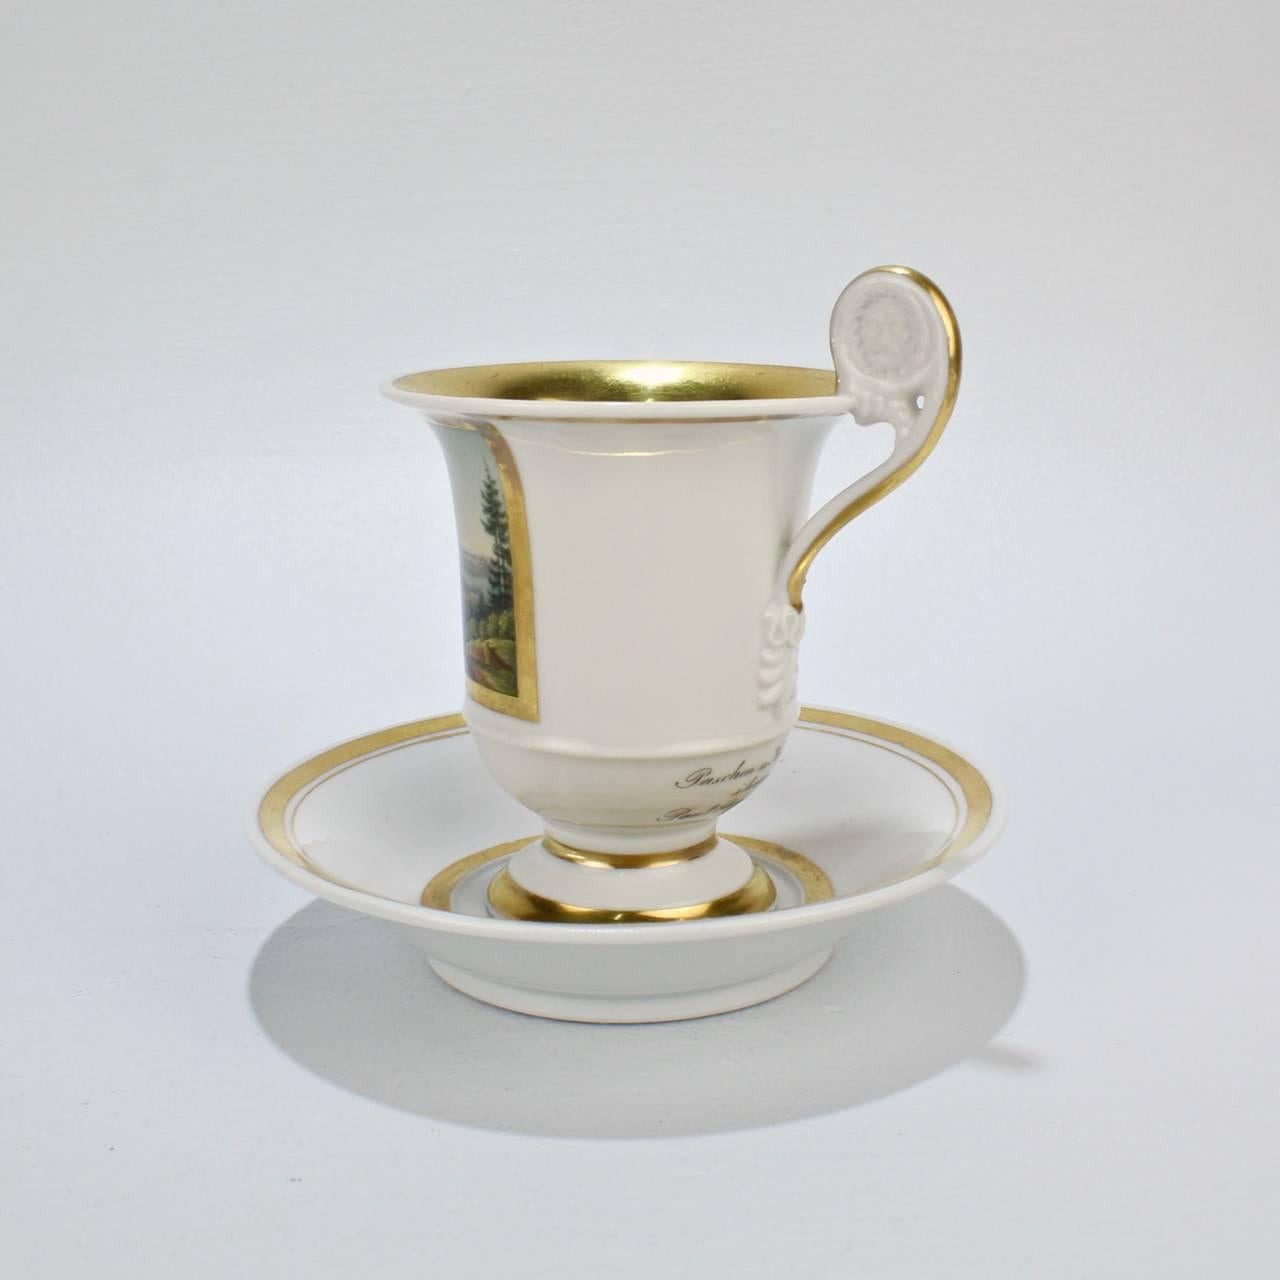 Early 19th Century Biedermeier Period Topographical Porcelain Cup and Saucer For Sale 1